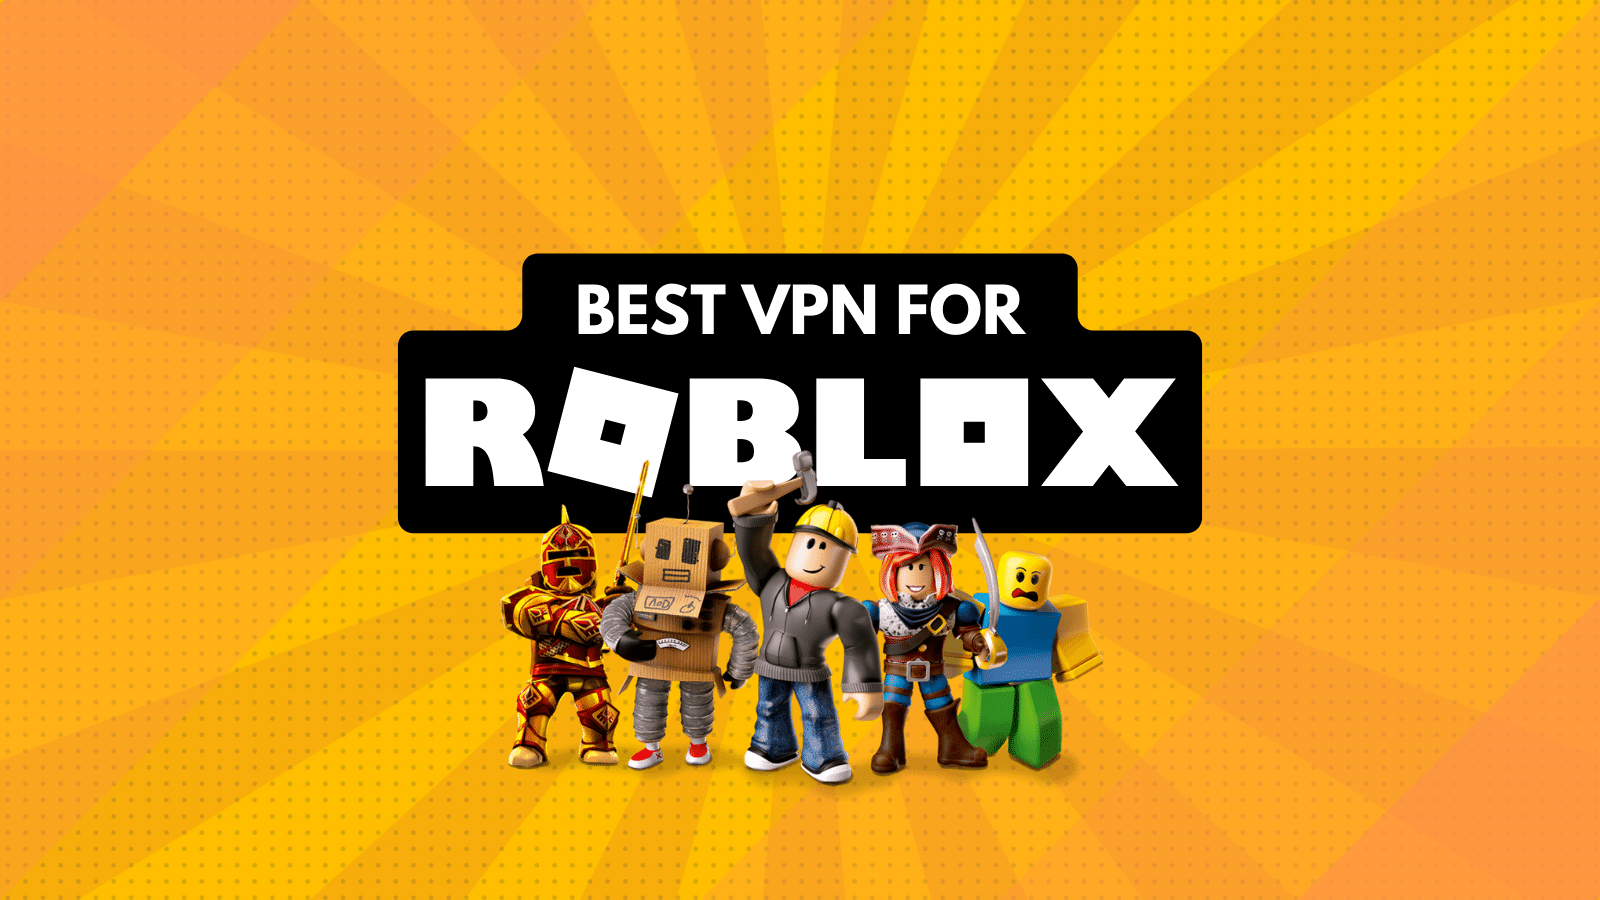 Roblox Unblocked Play Anywhere In 2023